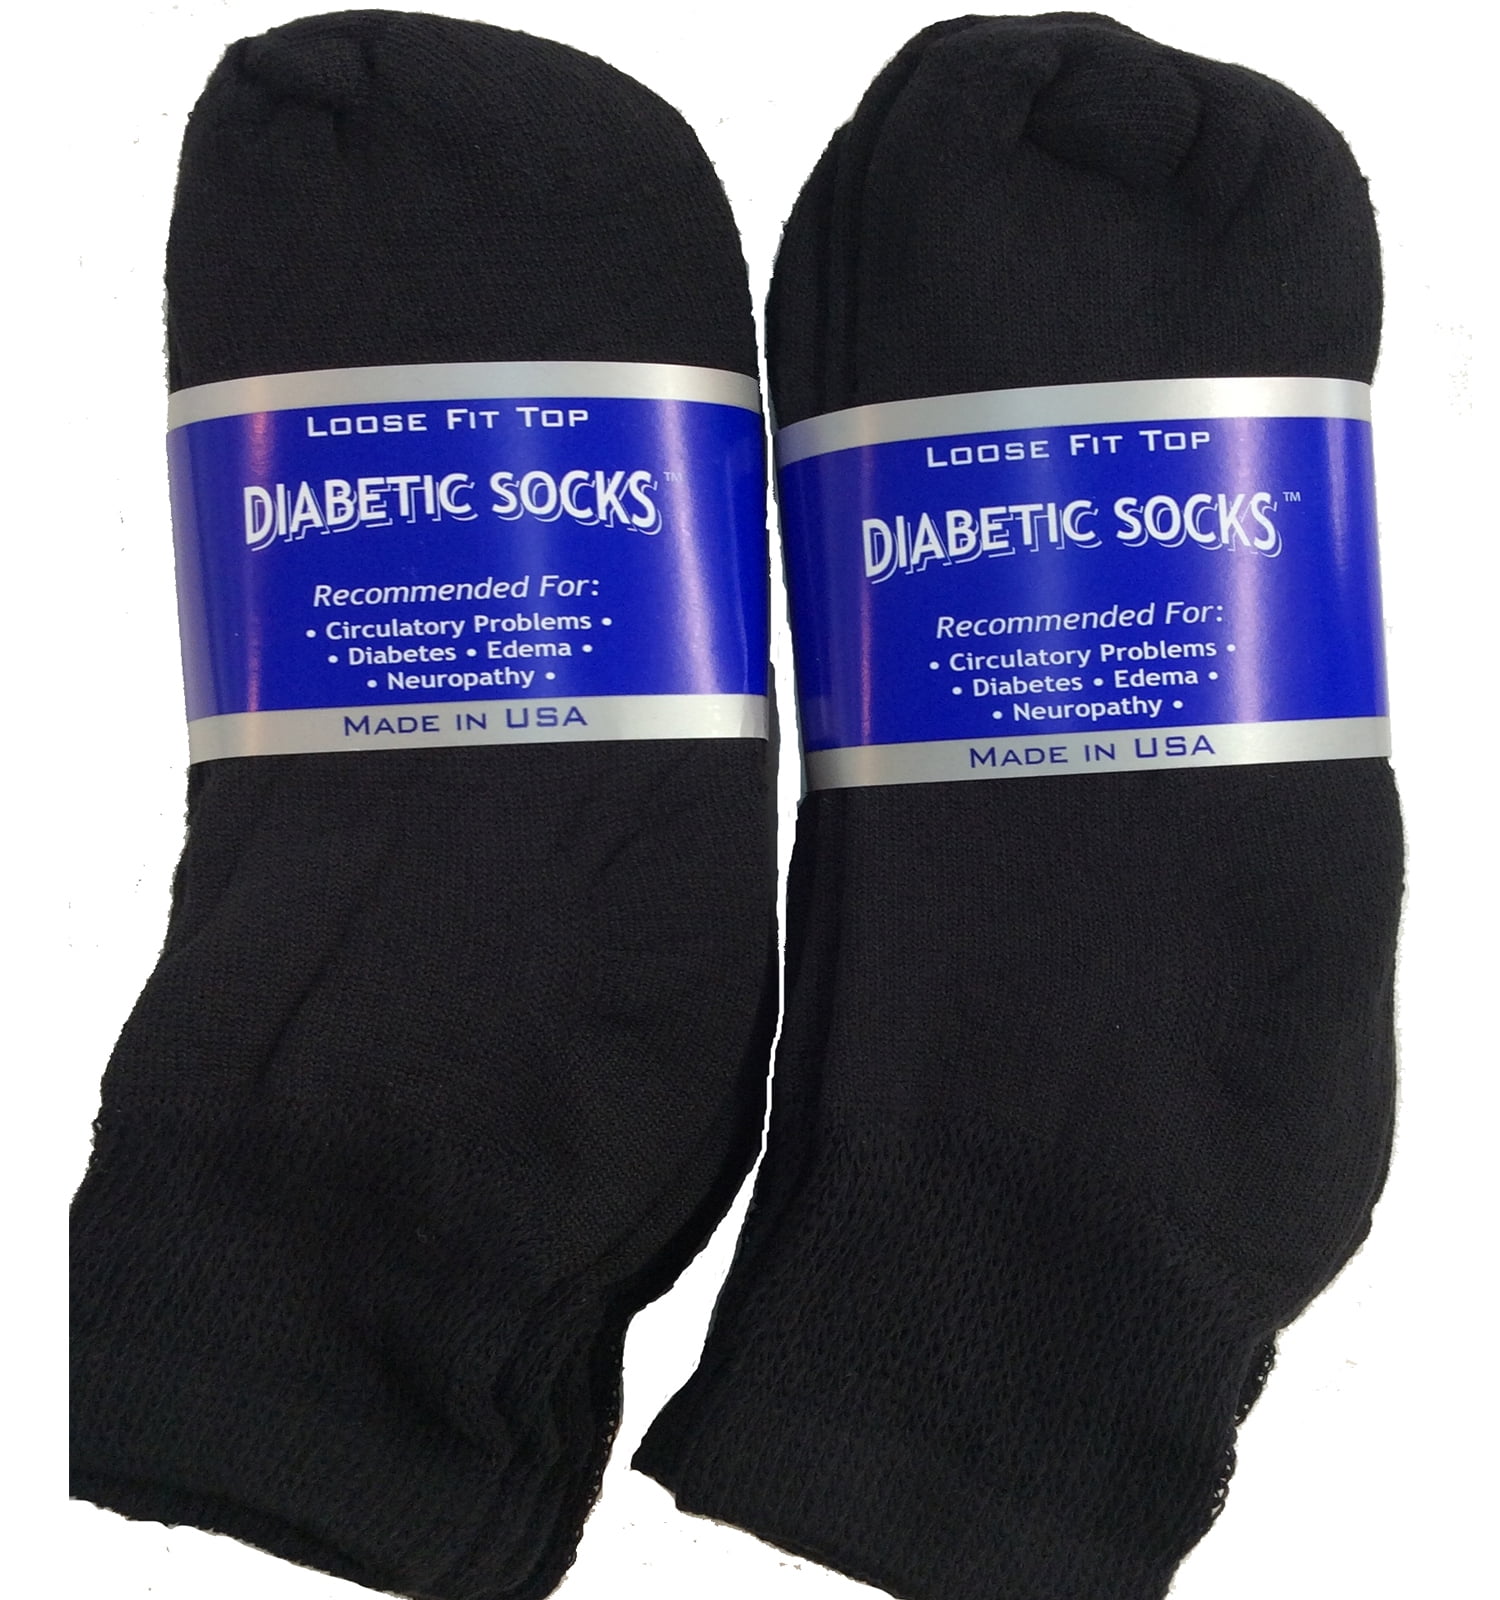 6 Pairs Of Mens Black Diabetic Ankle Socks 10 13 Size Made In Usa 